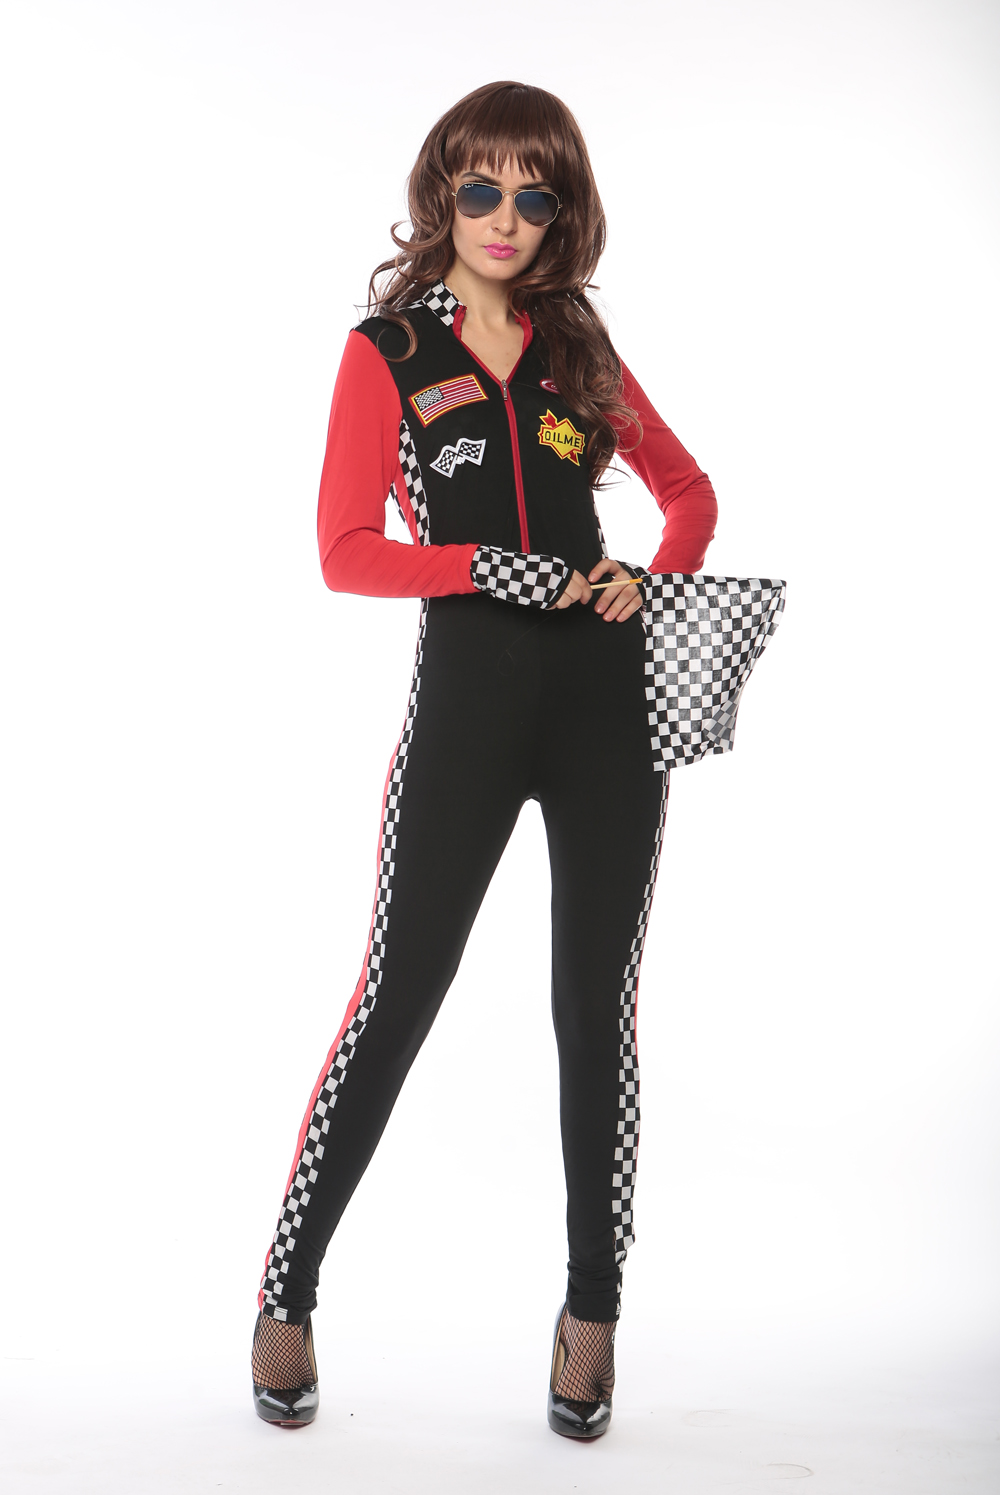 F1722 sexy red race girl jumpsuit,accessory:gloves